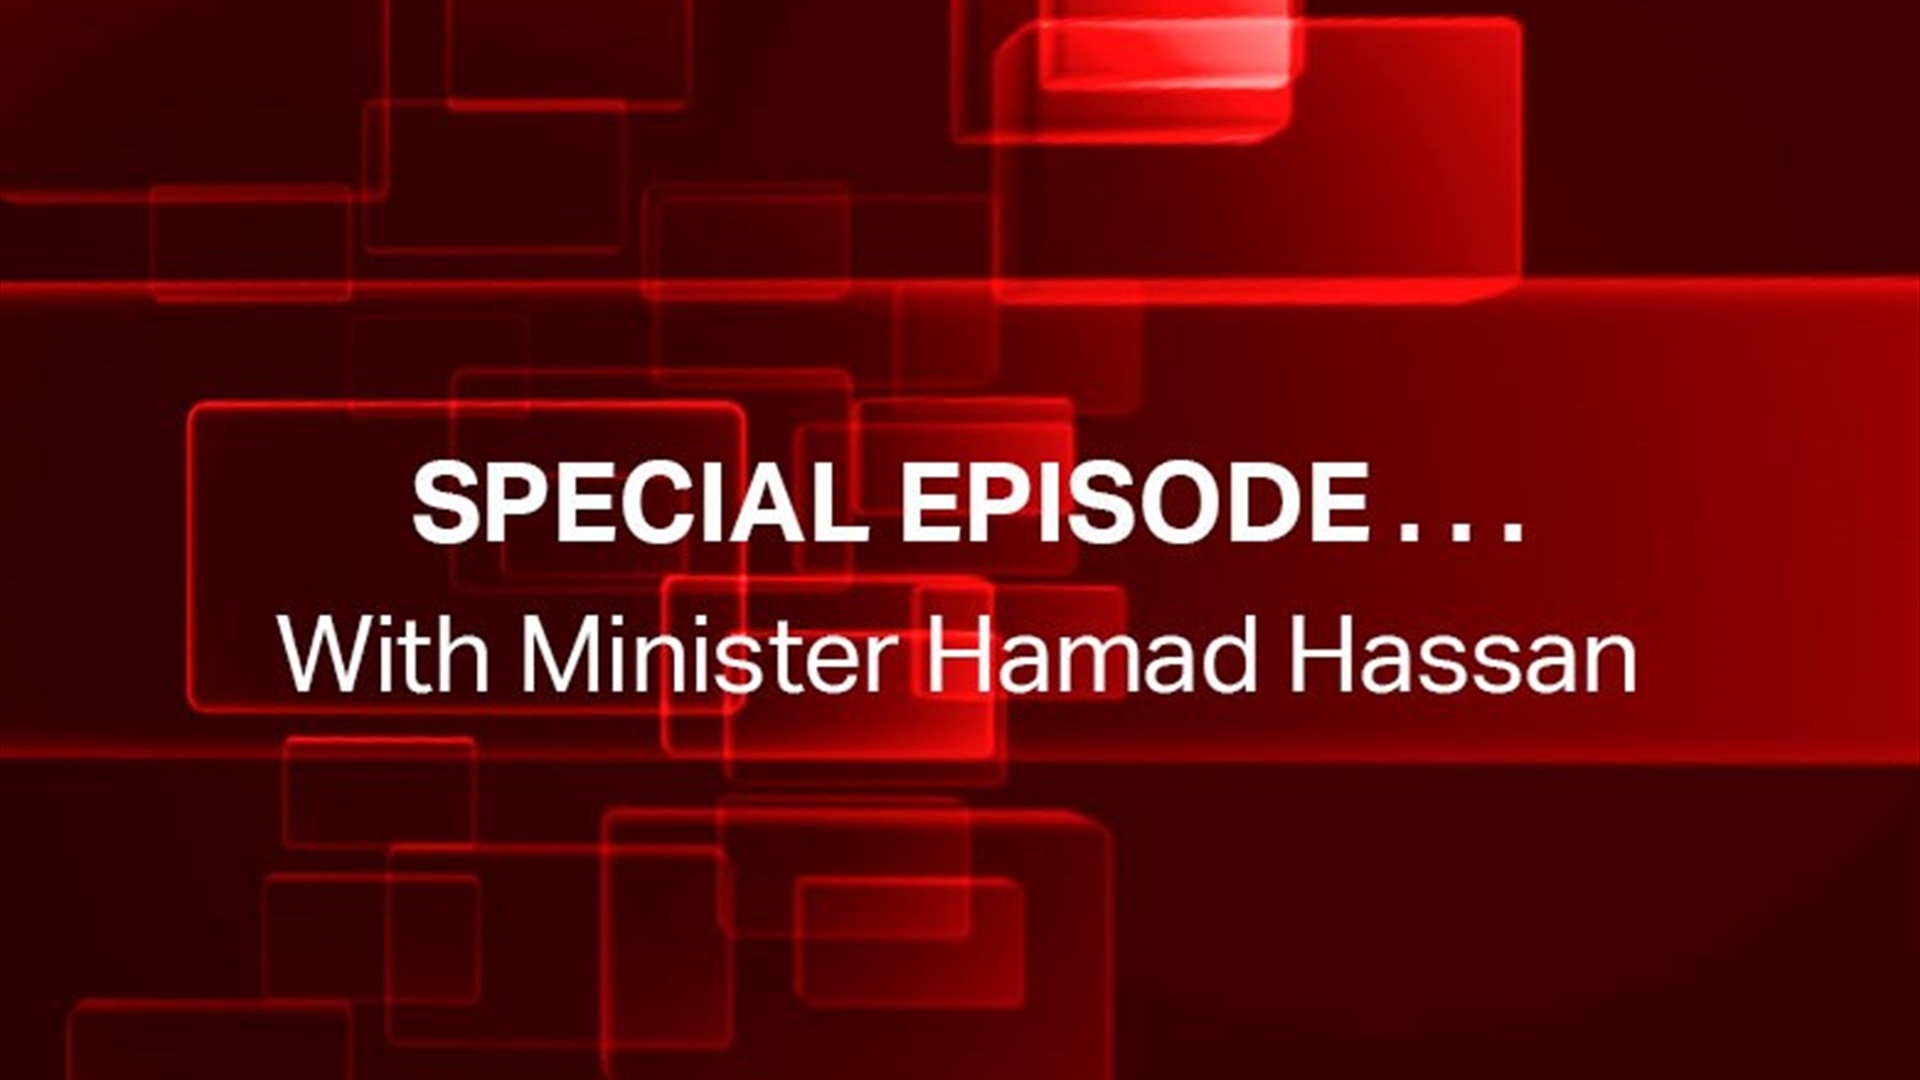 Special episode with Health Minister Hamad Hassan